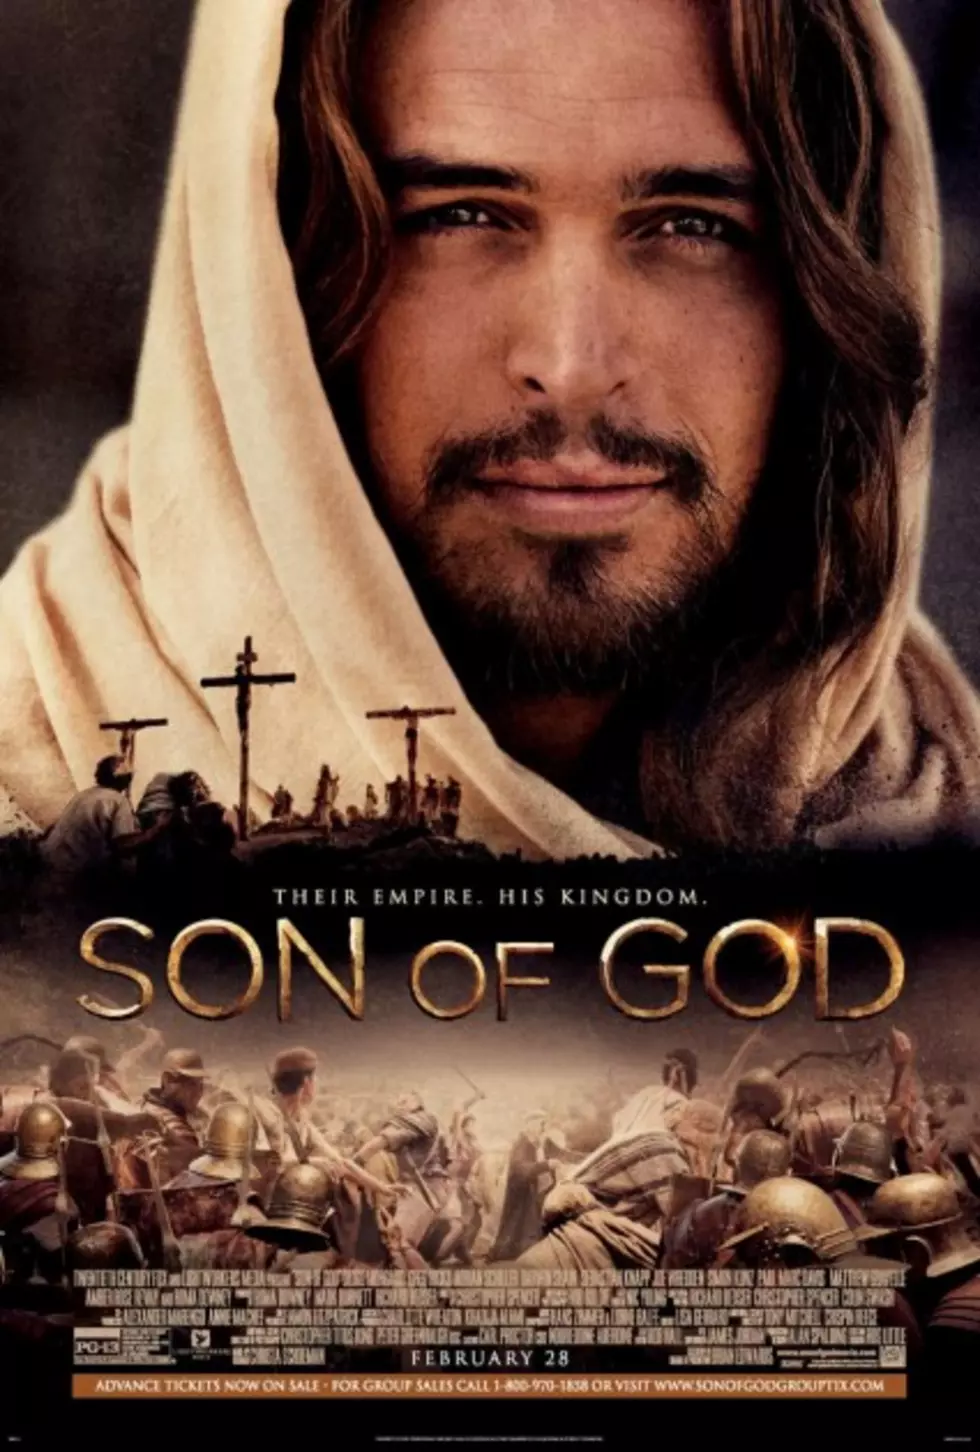 New Movies Opening Friday Feb 28th: “Son of God”, “Non-Stop” and “Repentance”